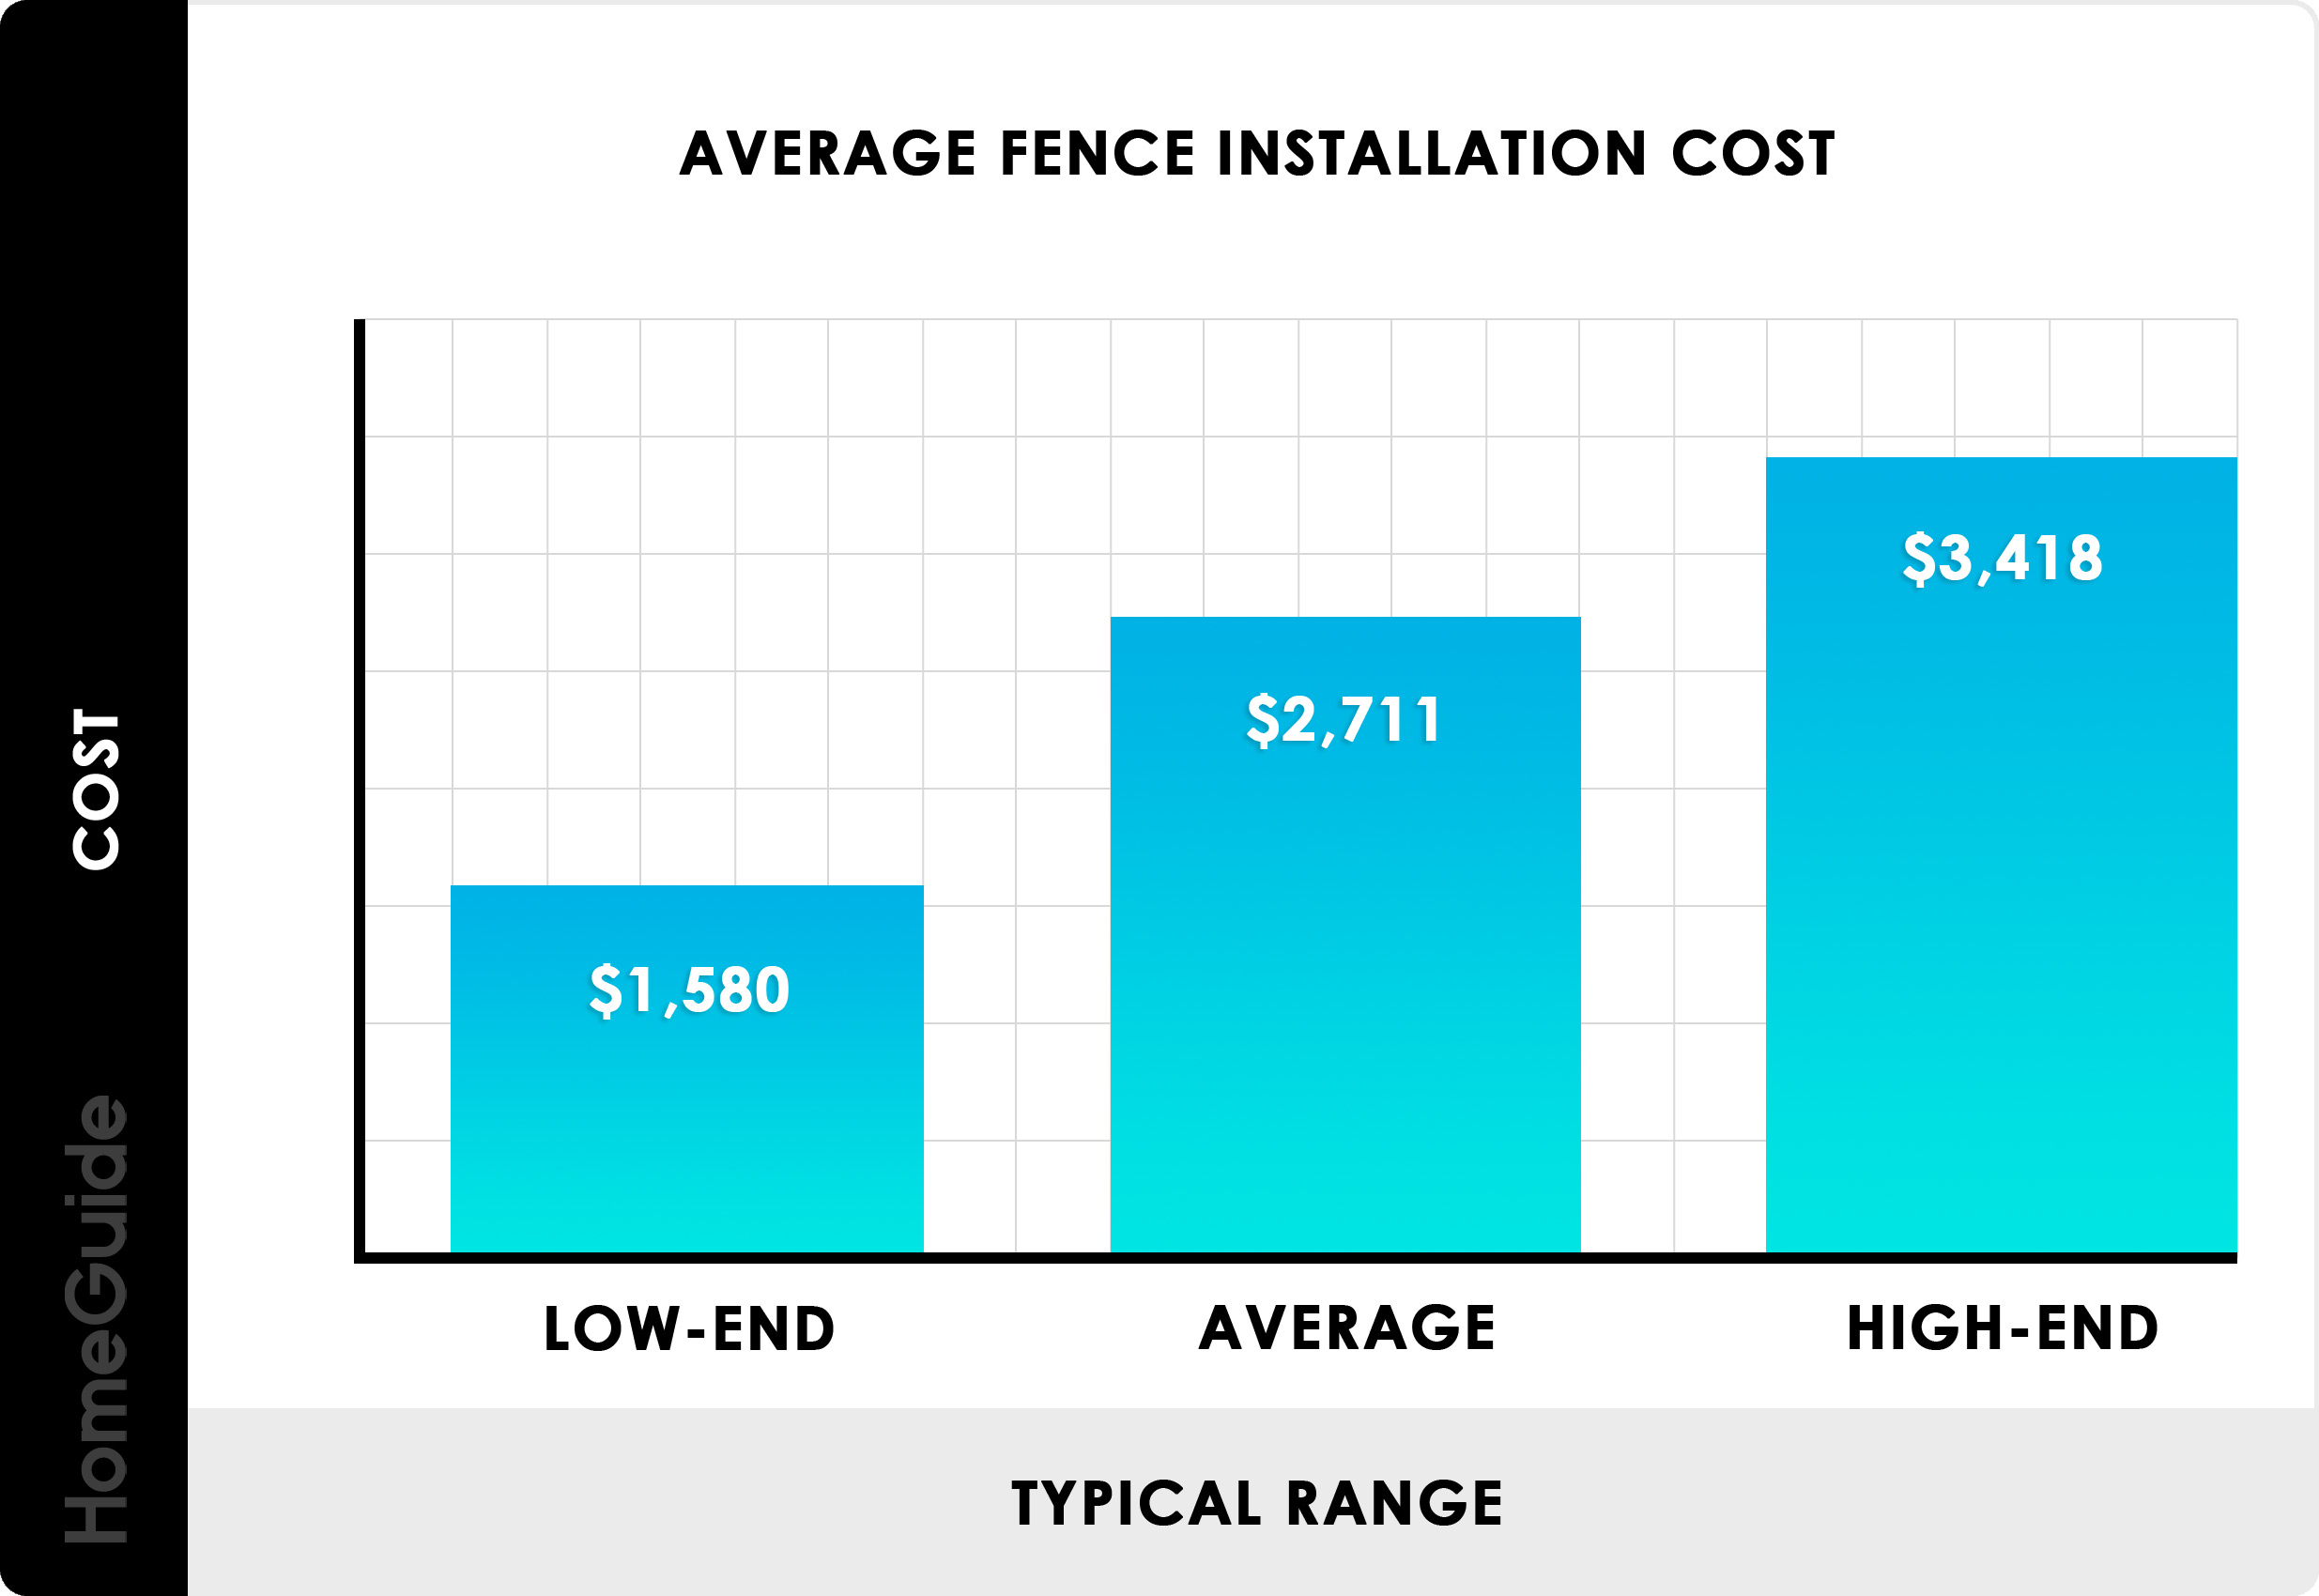 A Guide for Homeowners The Average Cost to Install a Fence 75178 1 - A Guide for Homeowners: The Average Cost to Install a Fence